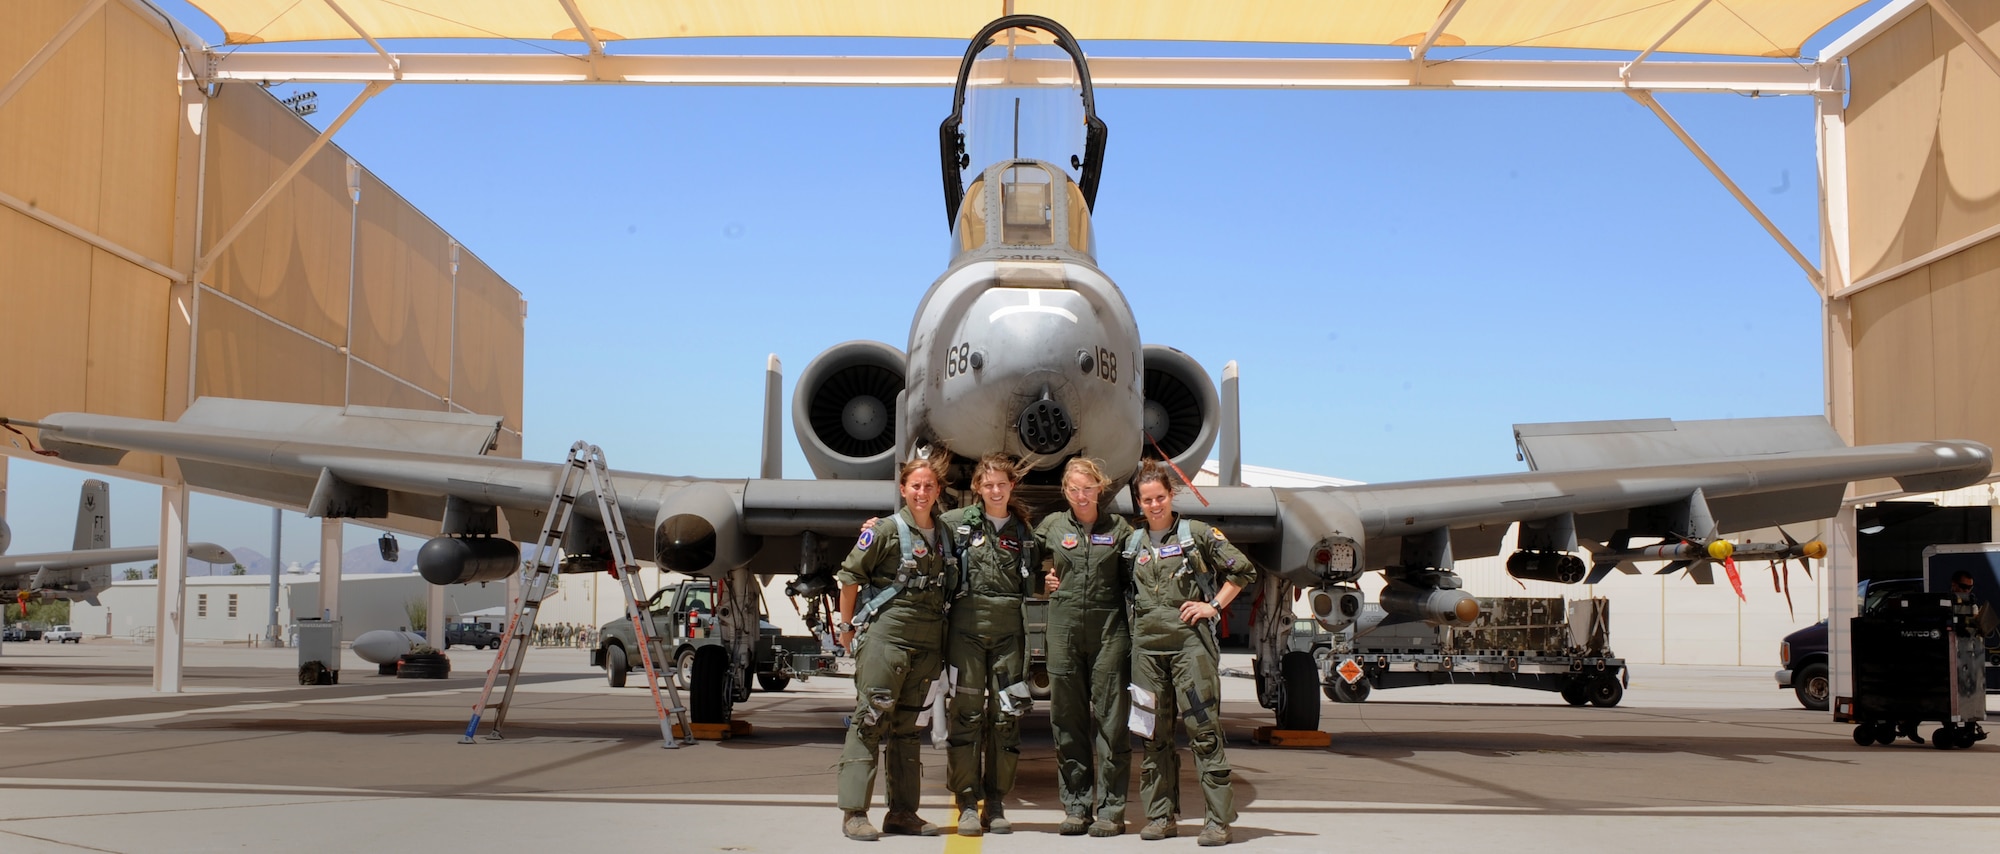 U.S. Air Force Capt. Rachel Winiecki, Capt. Kelly Nettleblad, and 1st Lt. Jessica Wyble, 354th Fighter Squadron A-10 pilots, and 1st Lt. Katherine Conrad, 107th FS Selfridge Air National Guard Base, Michigan, A-10 pilot, pose in front of an A-10 at Davis-Monthan Air Force Base, Ariz., May 5, 2014. This was Capt. Nettleblad’s final flight as part of the 354th. It was also an opportunity to make history by being the first four ship of all-female pilots.(U.S. Air Force photo be Airman 1st Class Cheyenne Morigeau/ Released)